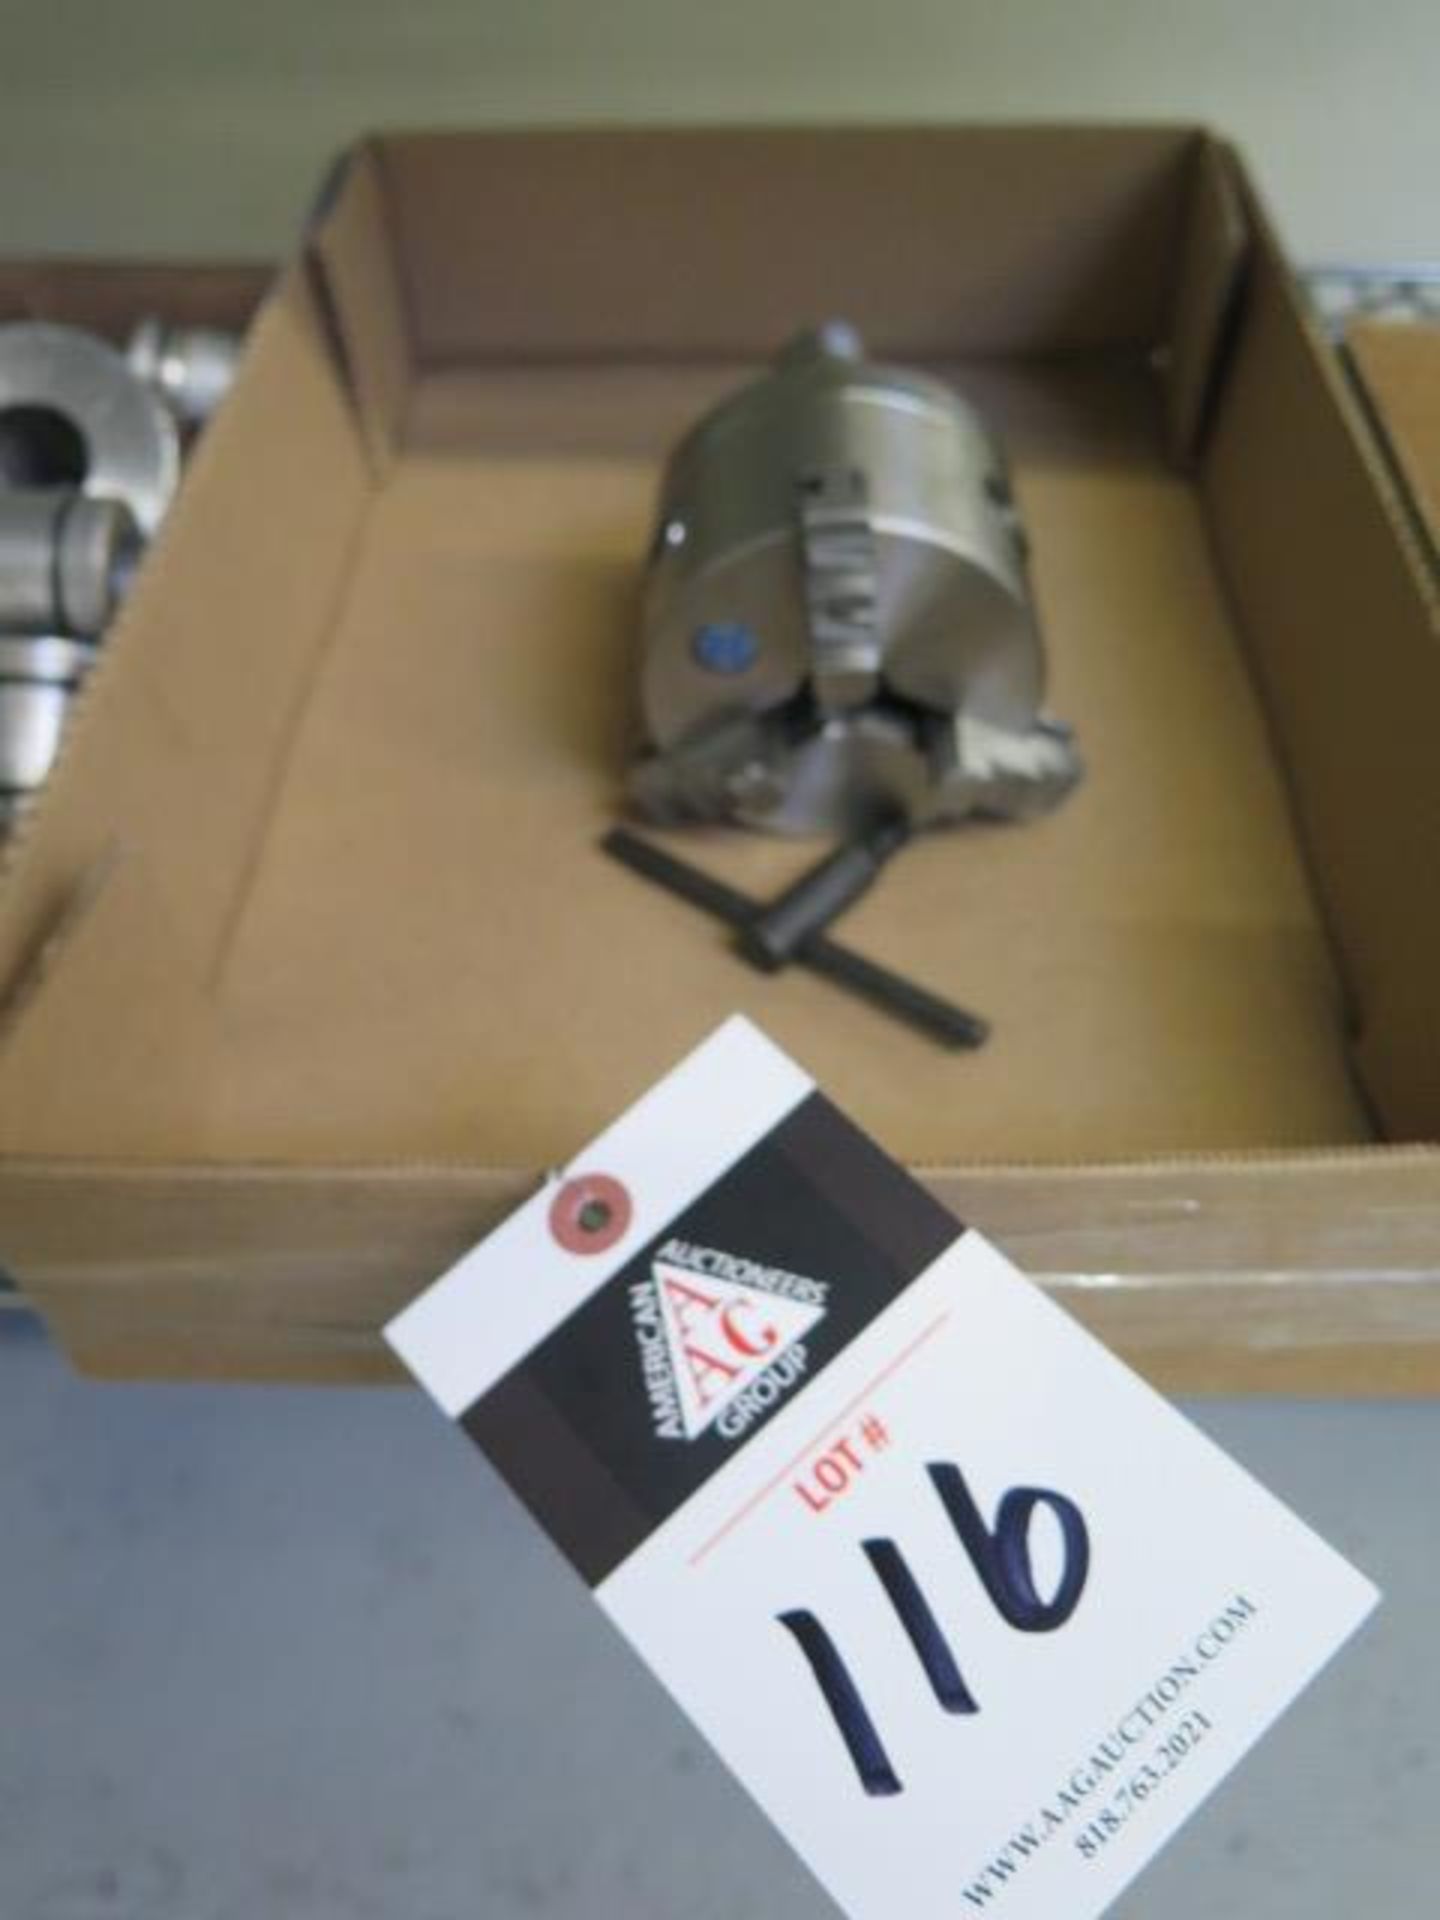 5" 3-Jaw Chuck w/ 5C Collet Adaptor (SOLD AS-IS - NO WARRANTY)